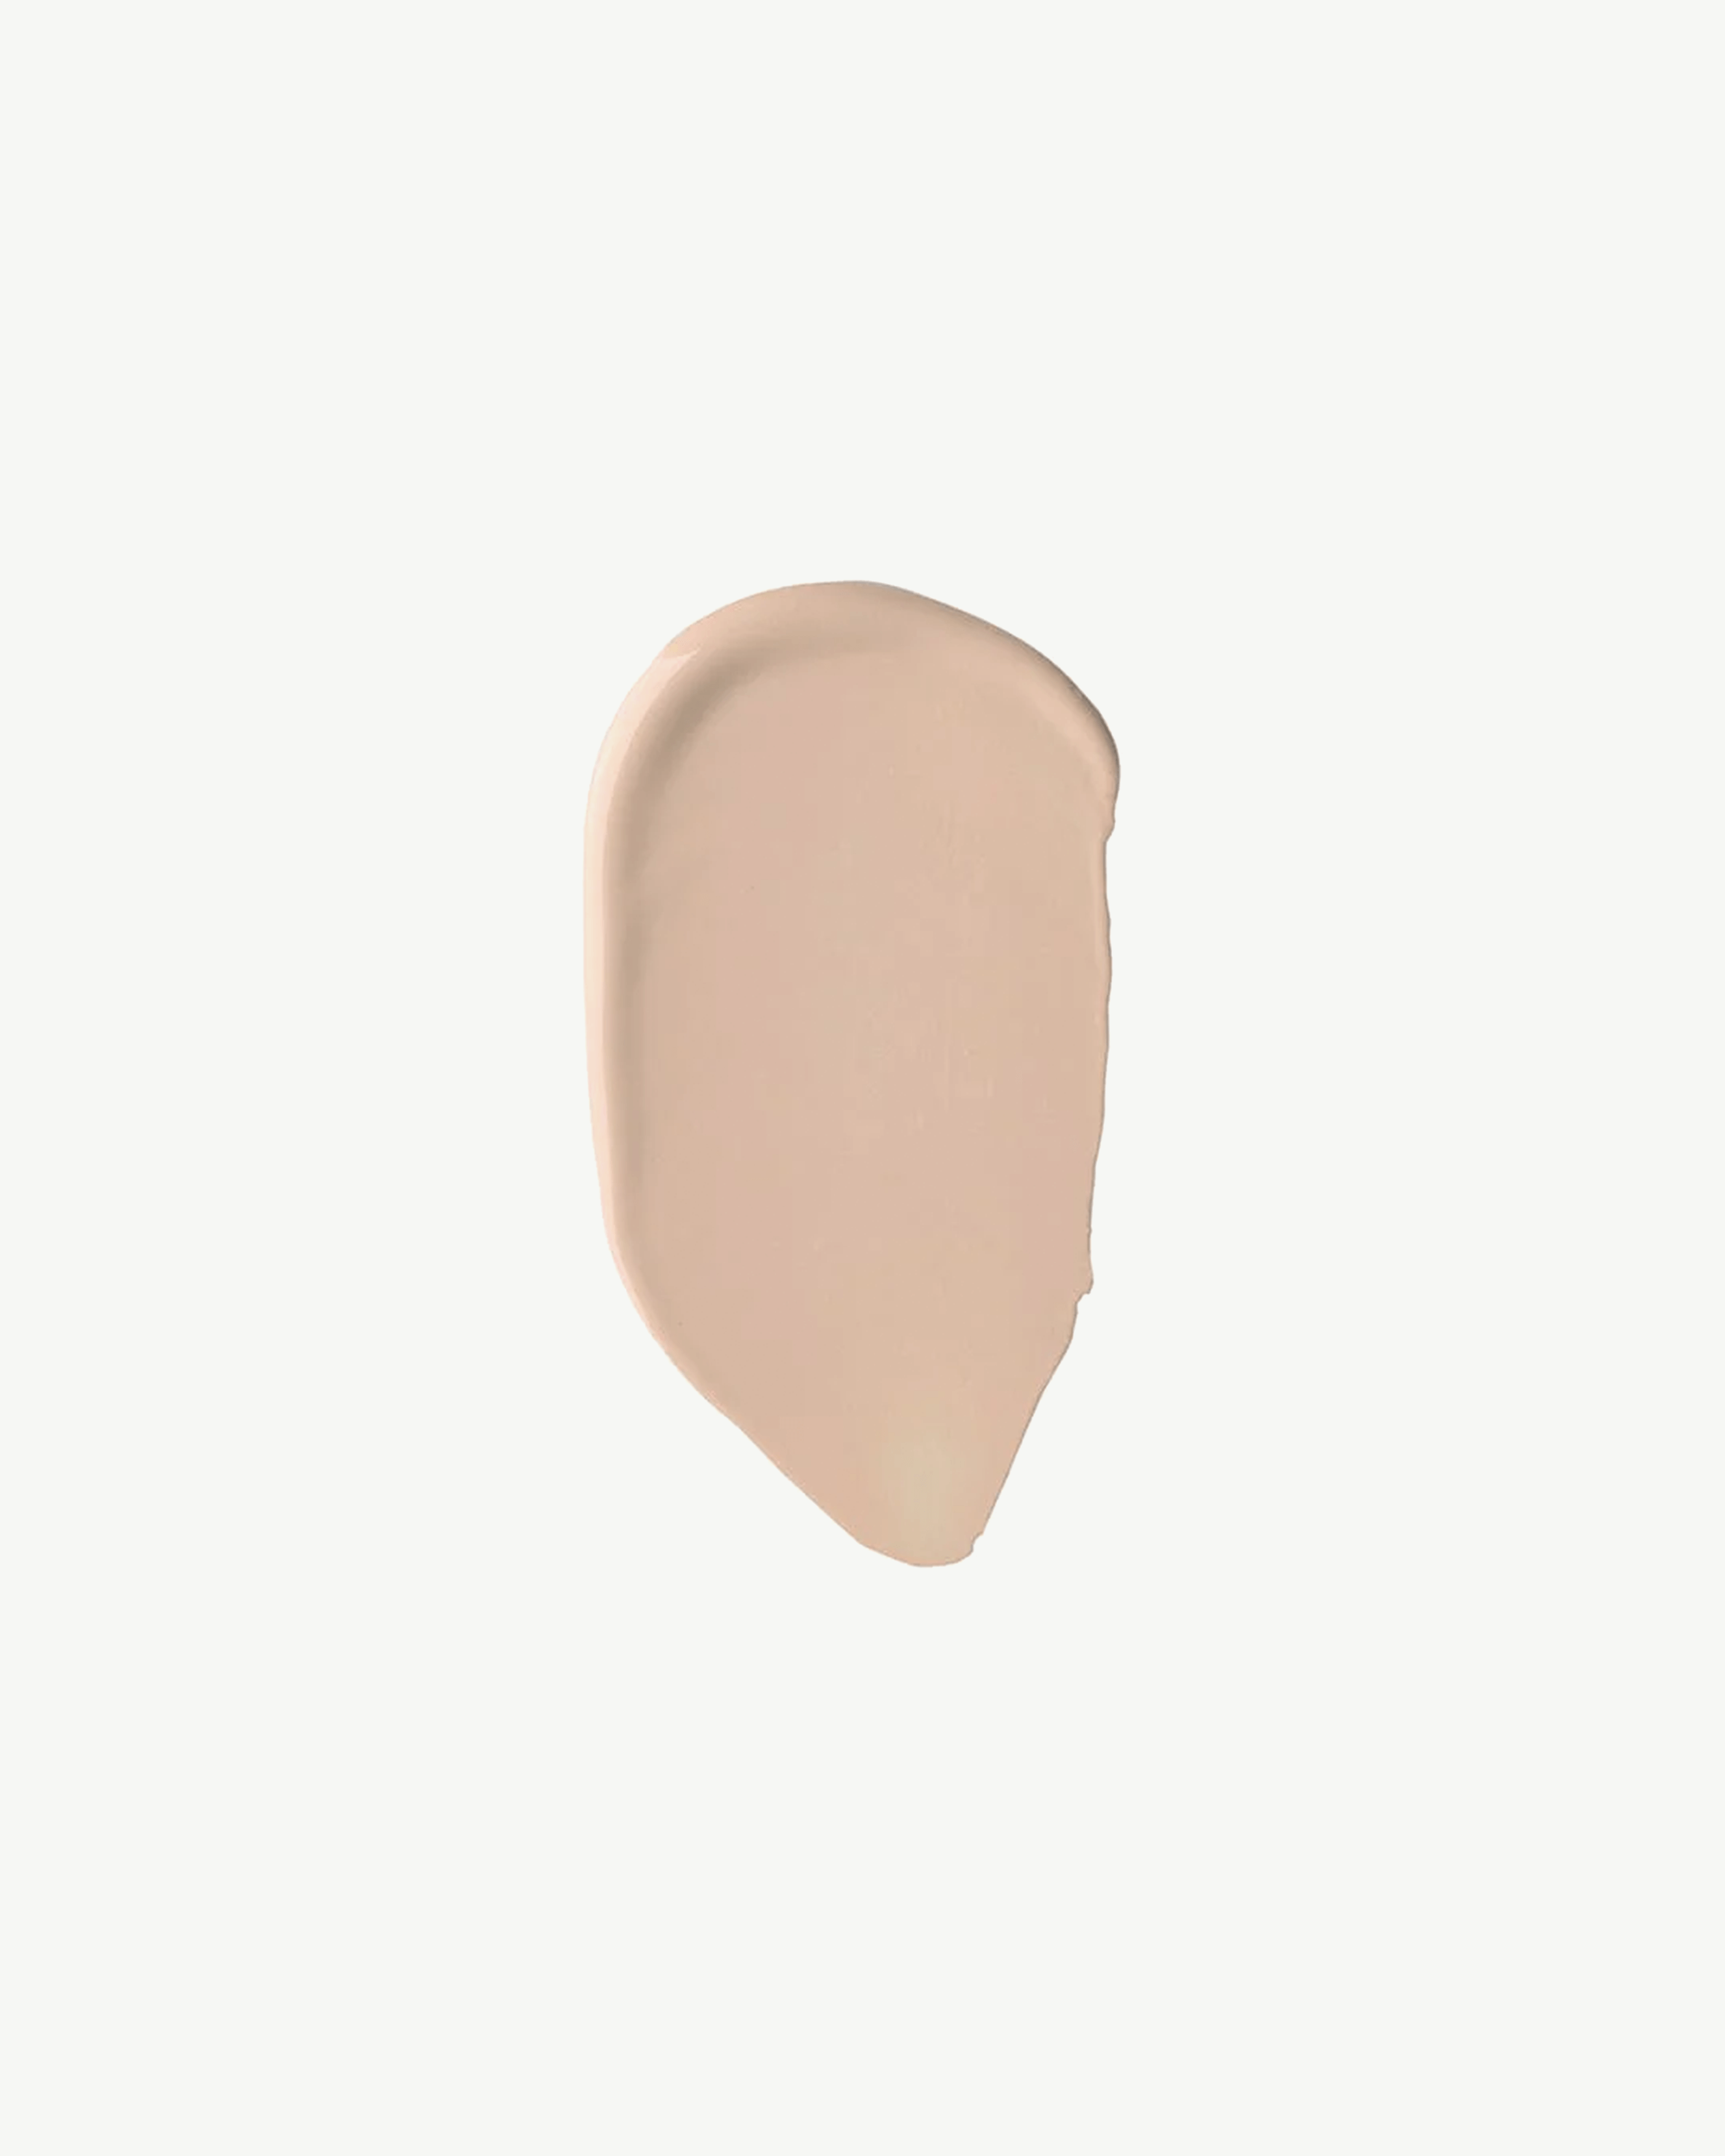 Shade 2 (for light skin tones with cool-neutral undertones)